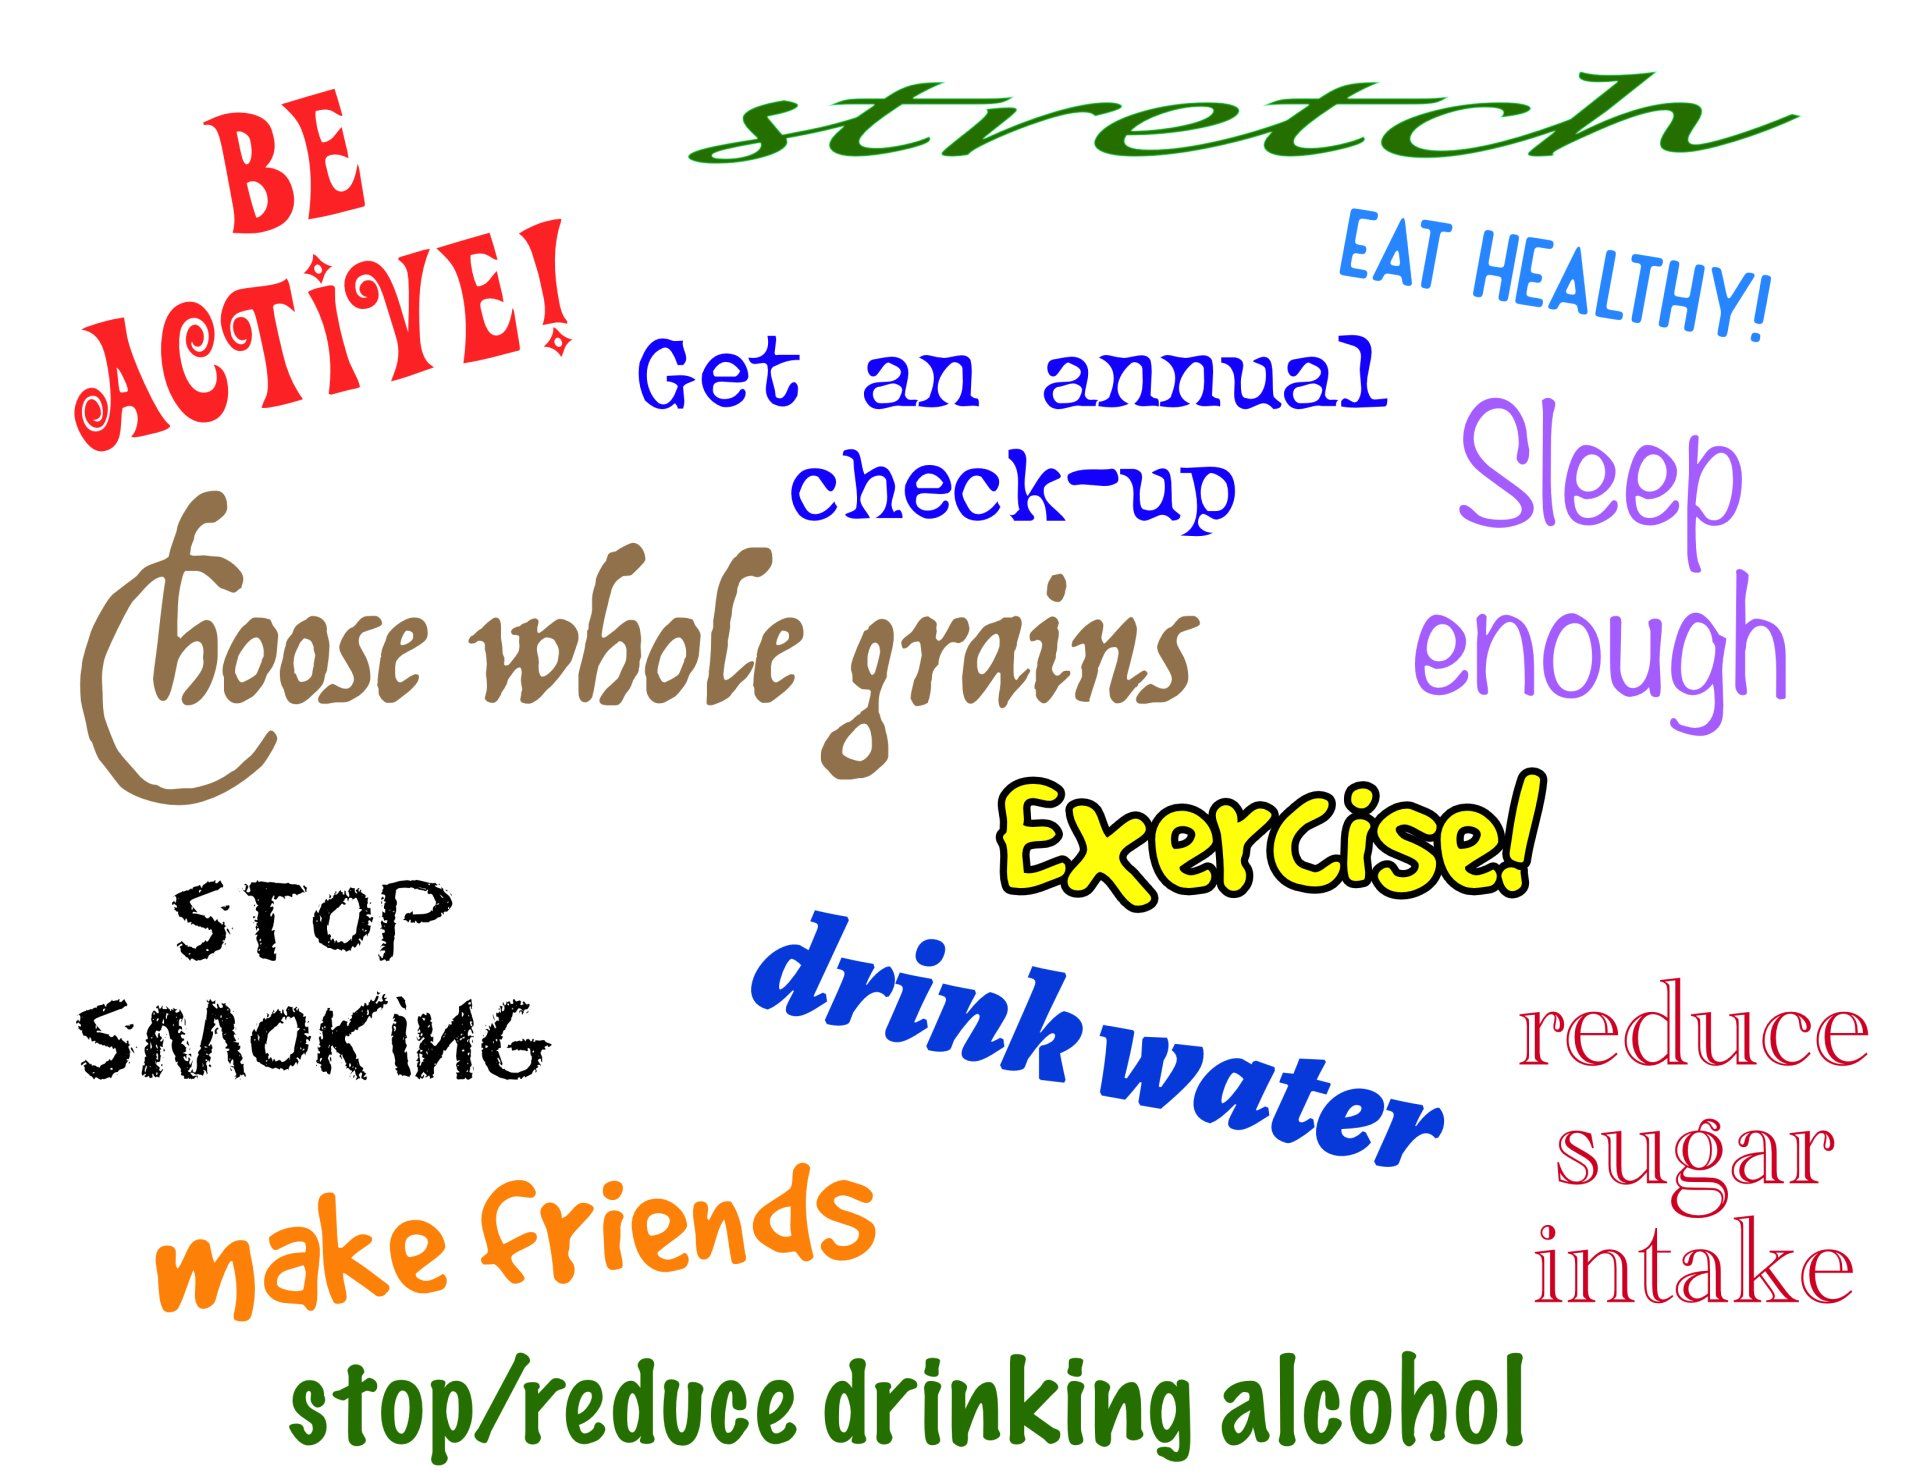 Everything we should do to stay healthy